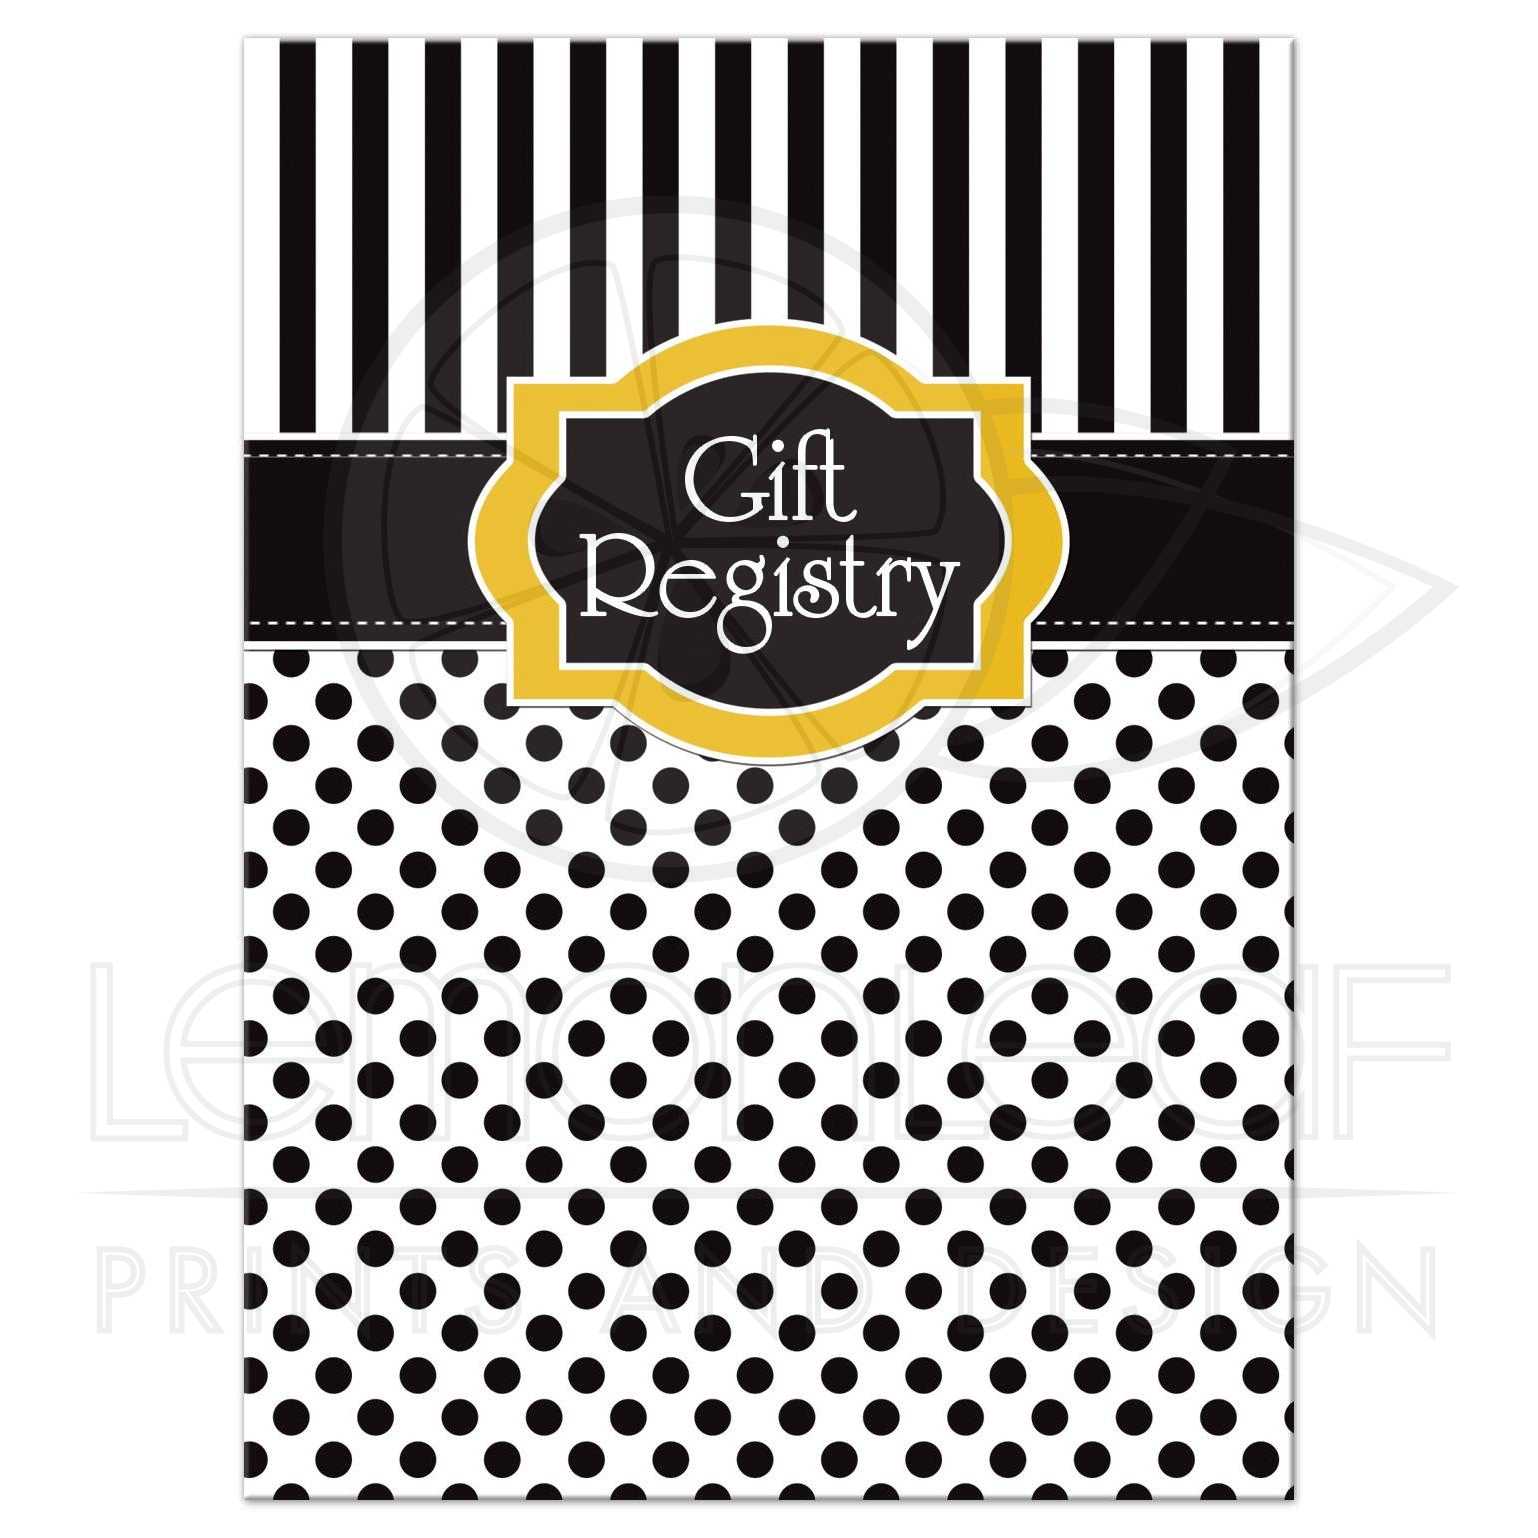 White Stripes with Yellow Logo - Black, White and Yellow Polka Dots and Striped Gift Registry ...